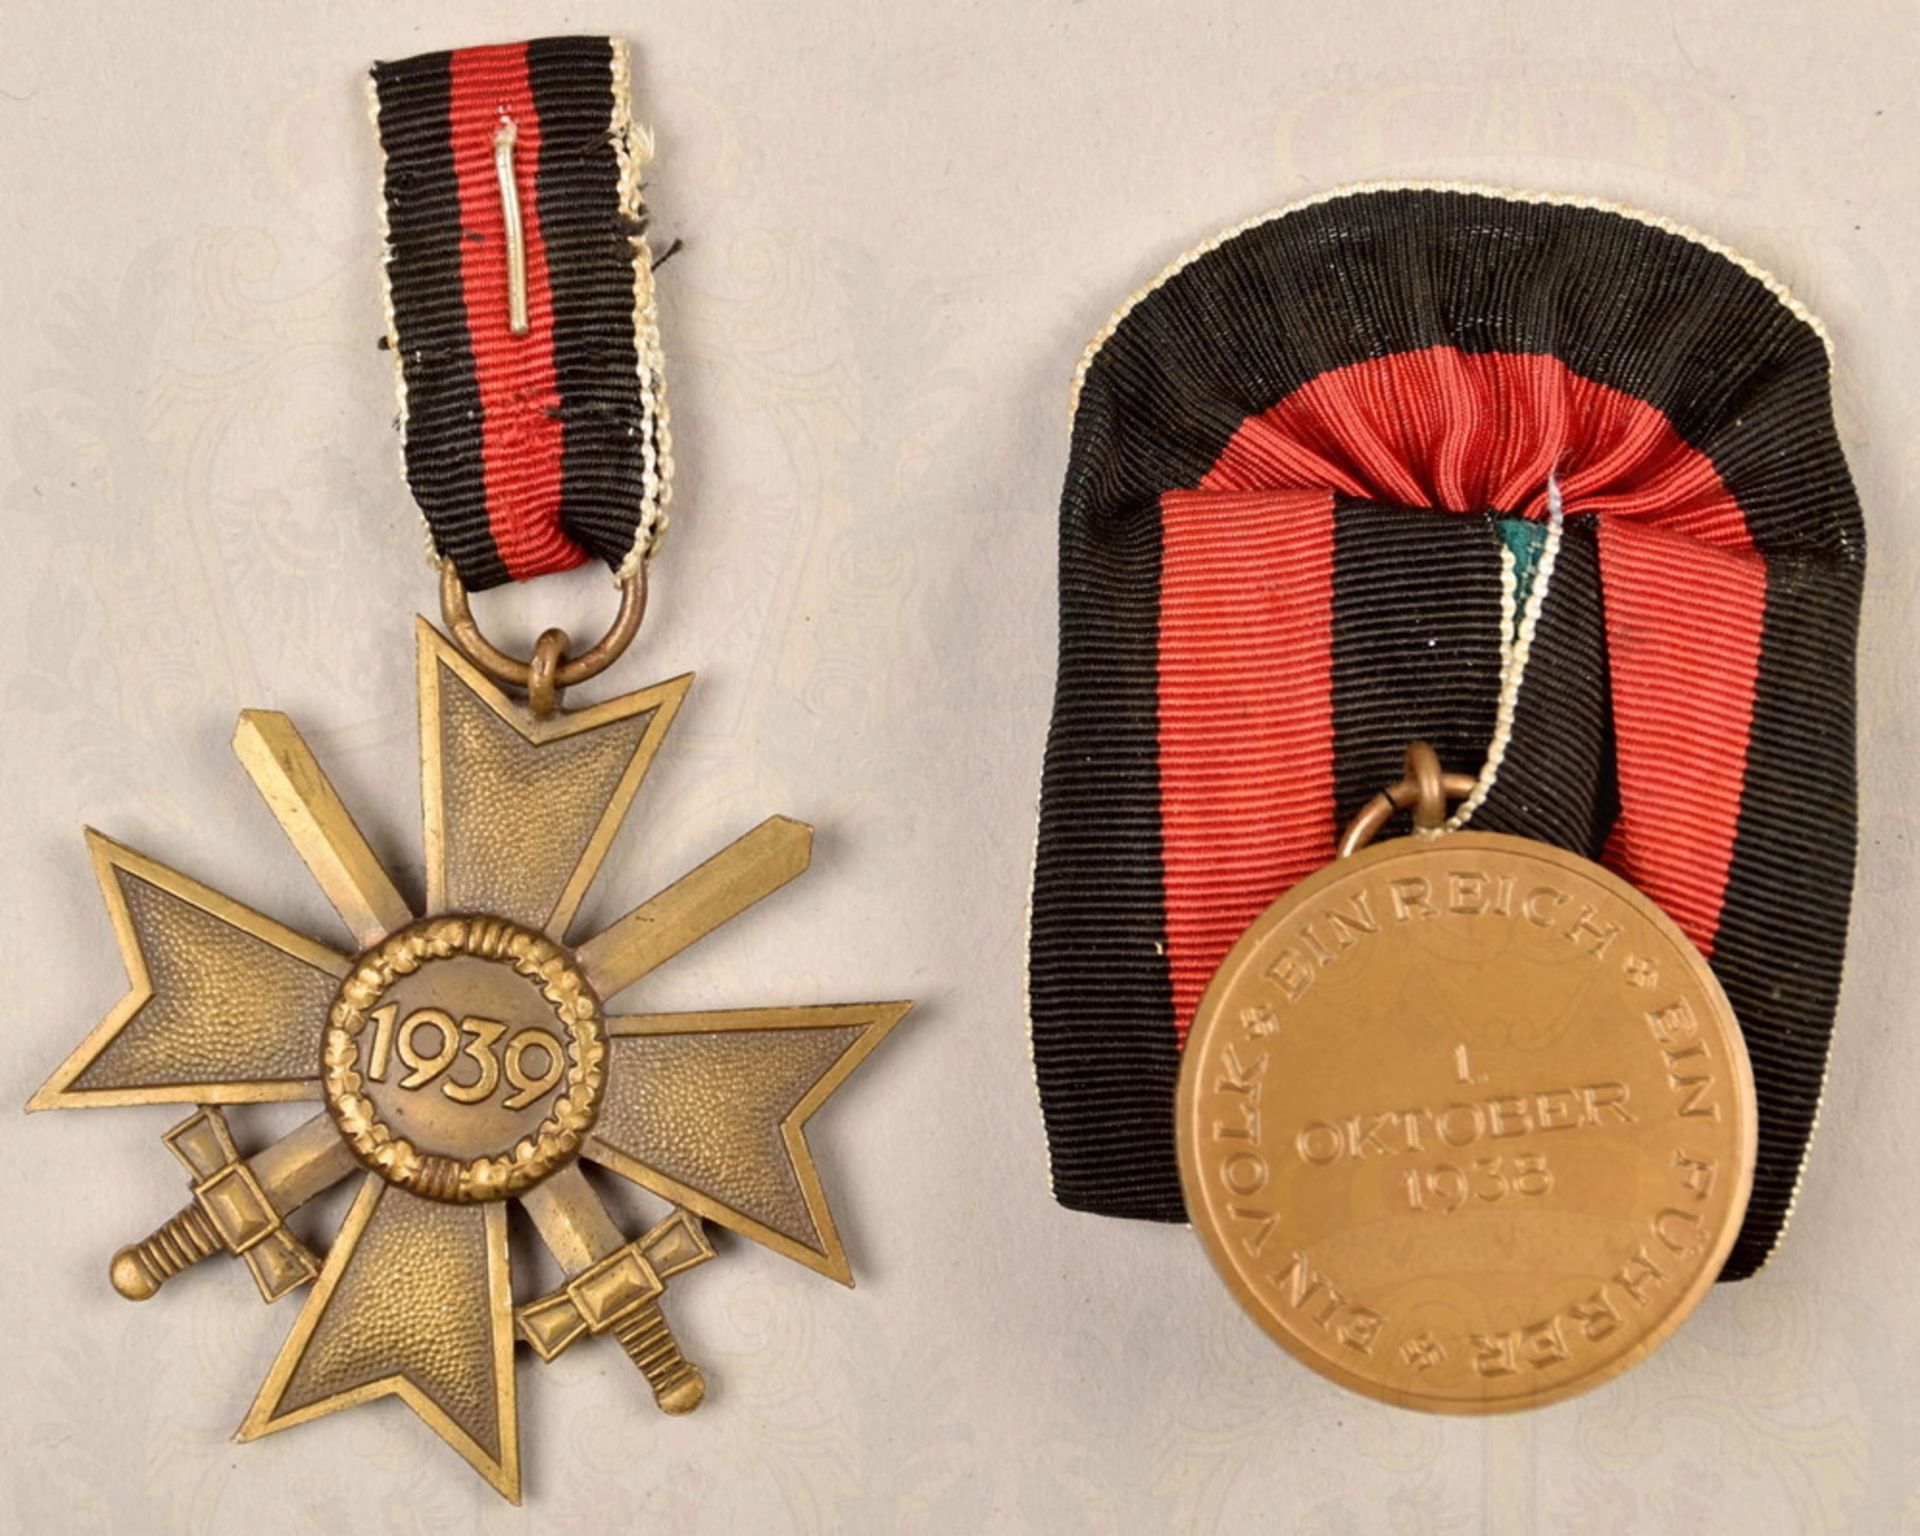 Sudeten Medal 1938 and War Merit Cross 2nd Class with Swords - Image 3 of 3